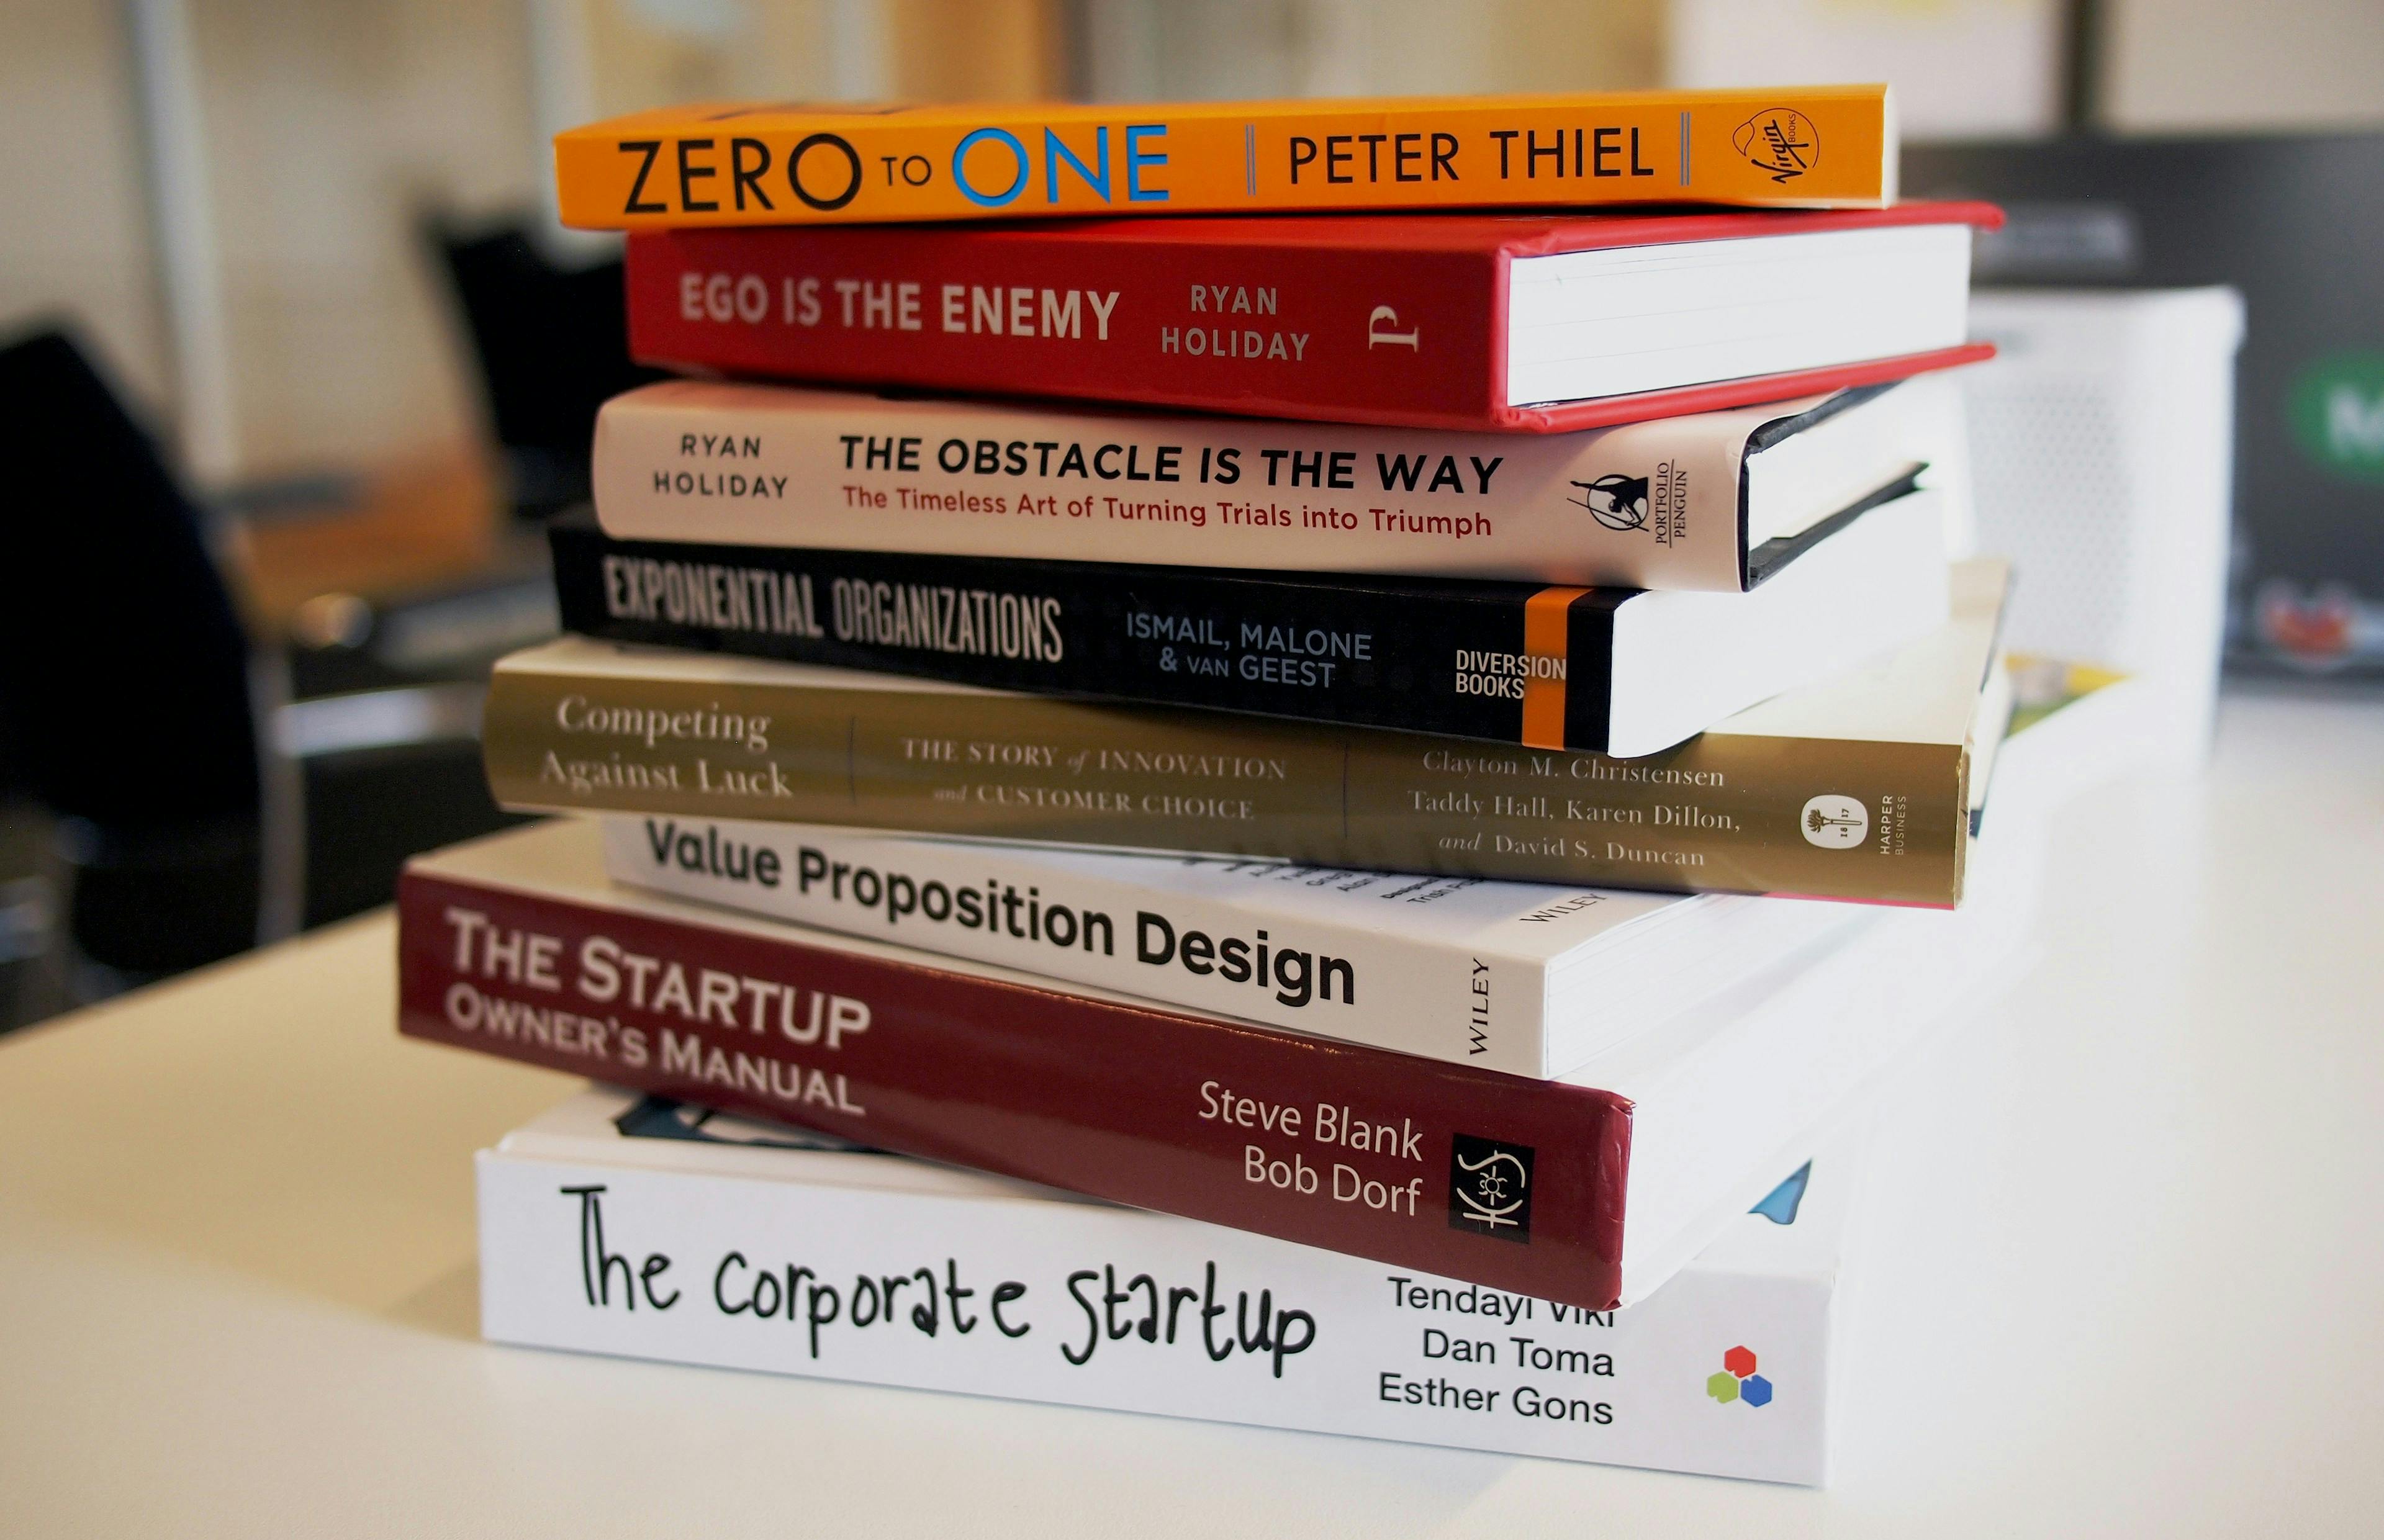 The Lean Startup Method: A Technical Guide to Building a Successful Business